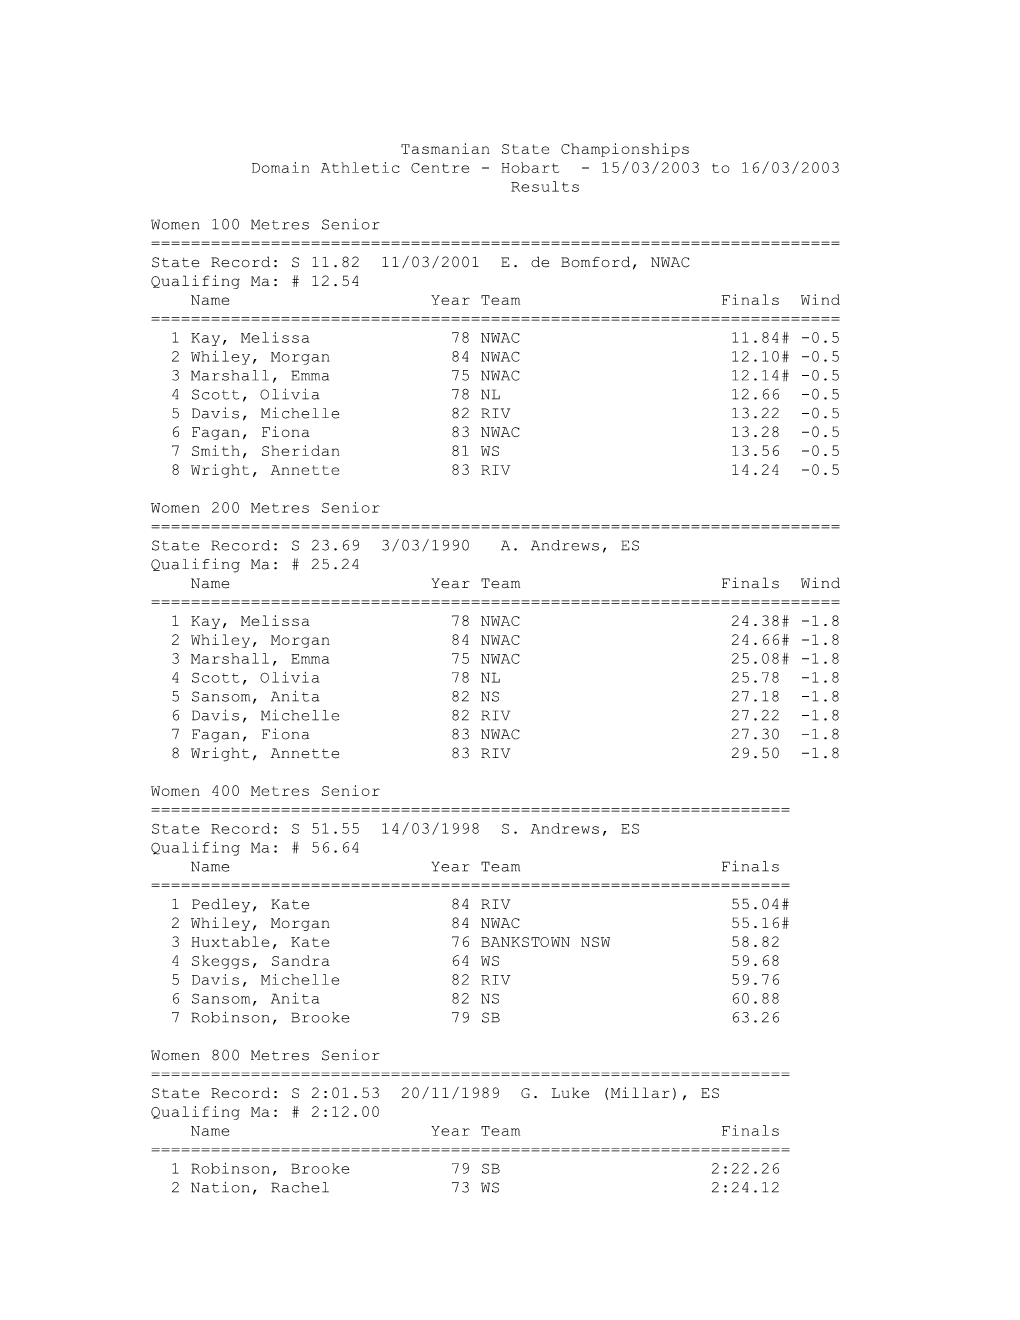 Tasmanian State Championships Domain Athletic Centre - Hobart - 15/03/2003 to 16/03/2003 Results